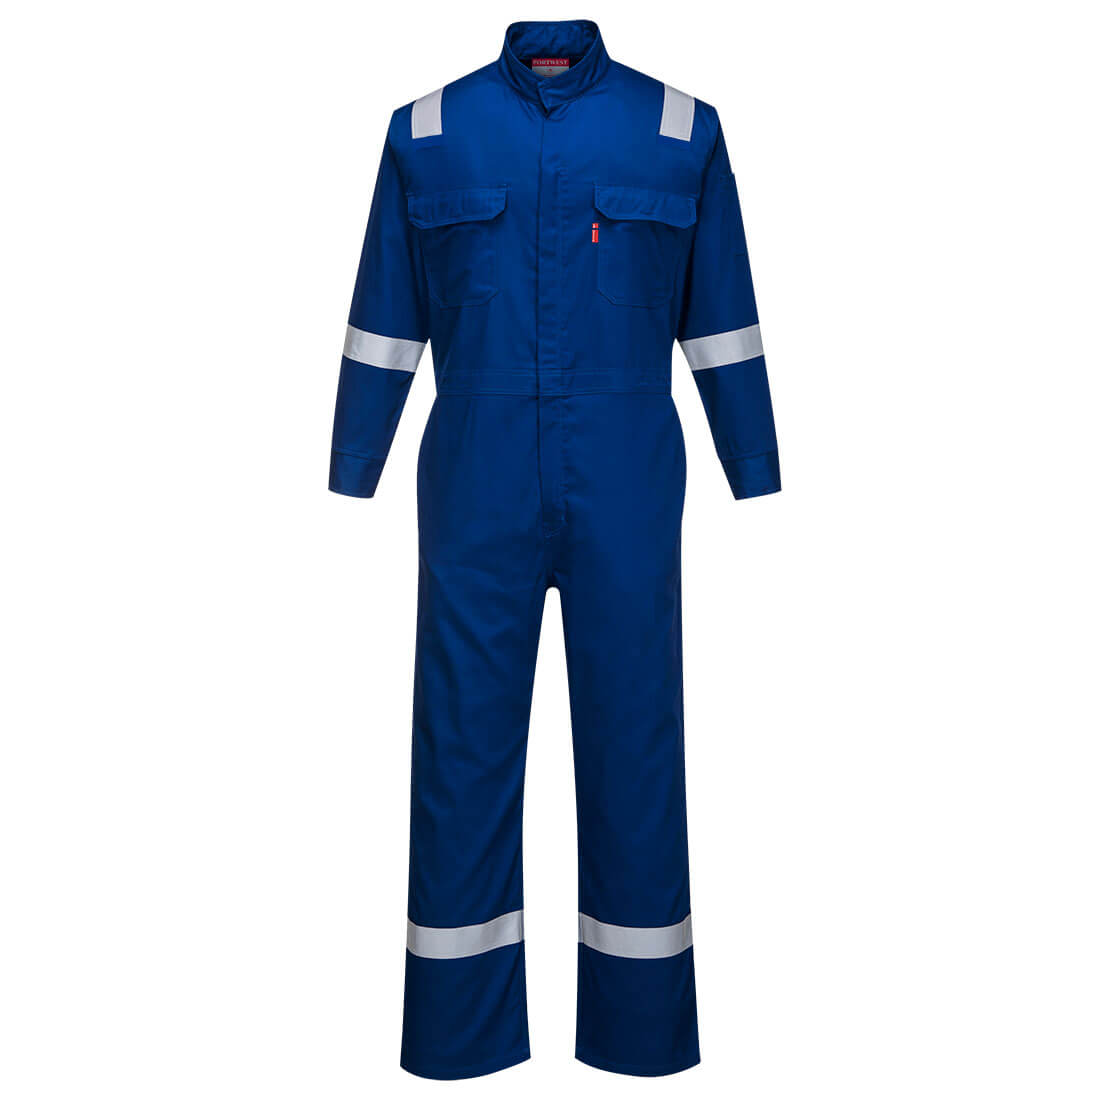 Bizflame 88/12 Iona Coverall | Phelps PPE